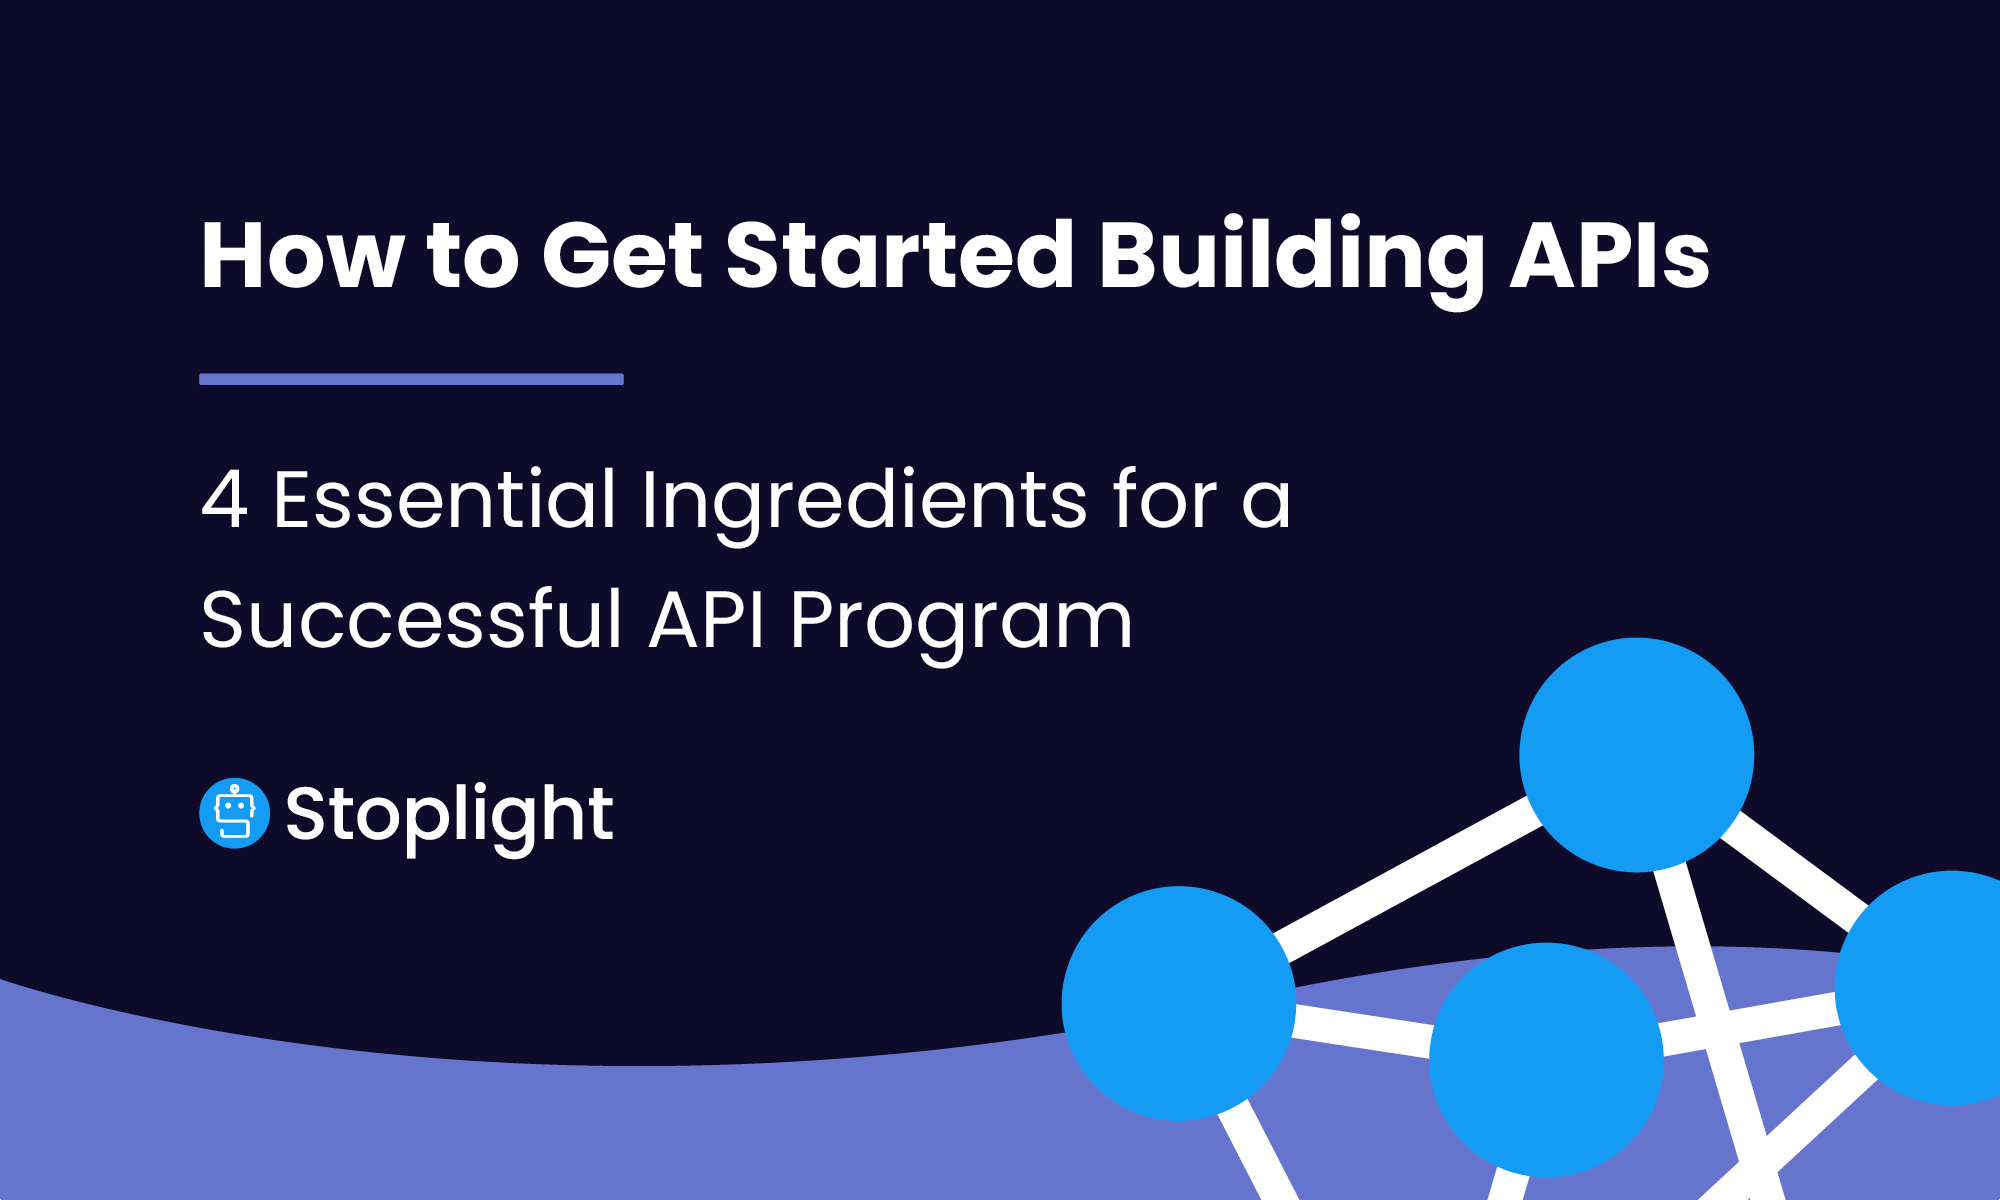 How to Get Started Building APIs: 4 Essential Ingredients for a Successful API Program